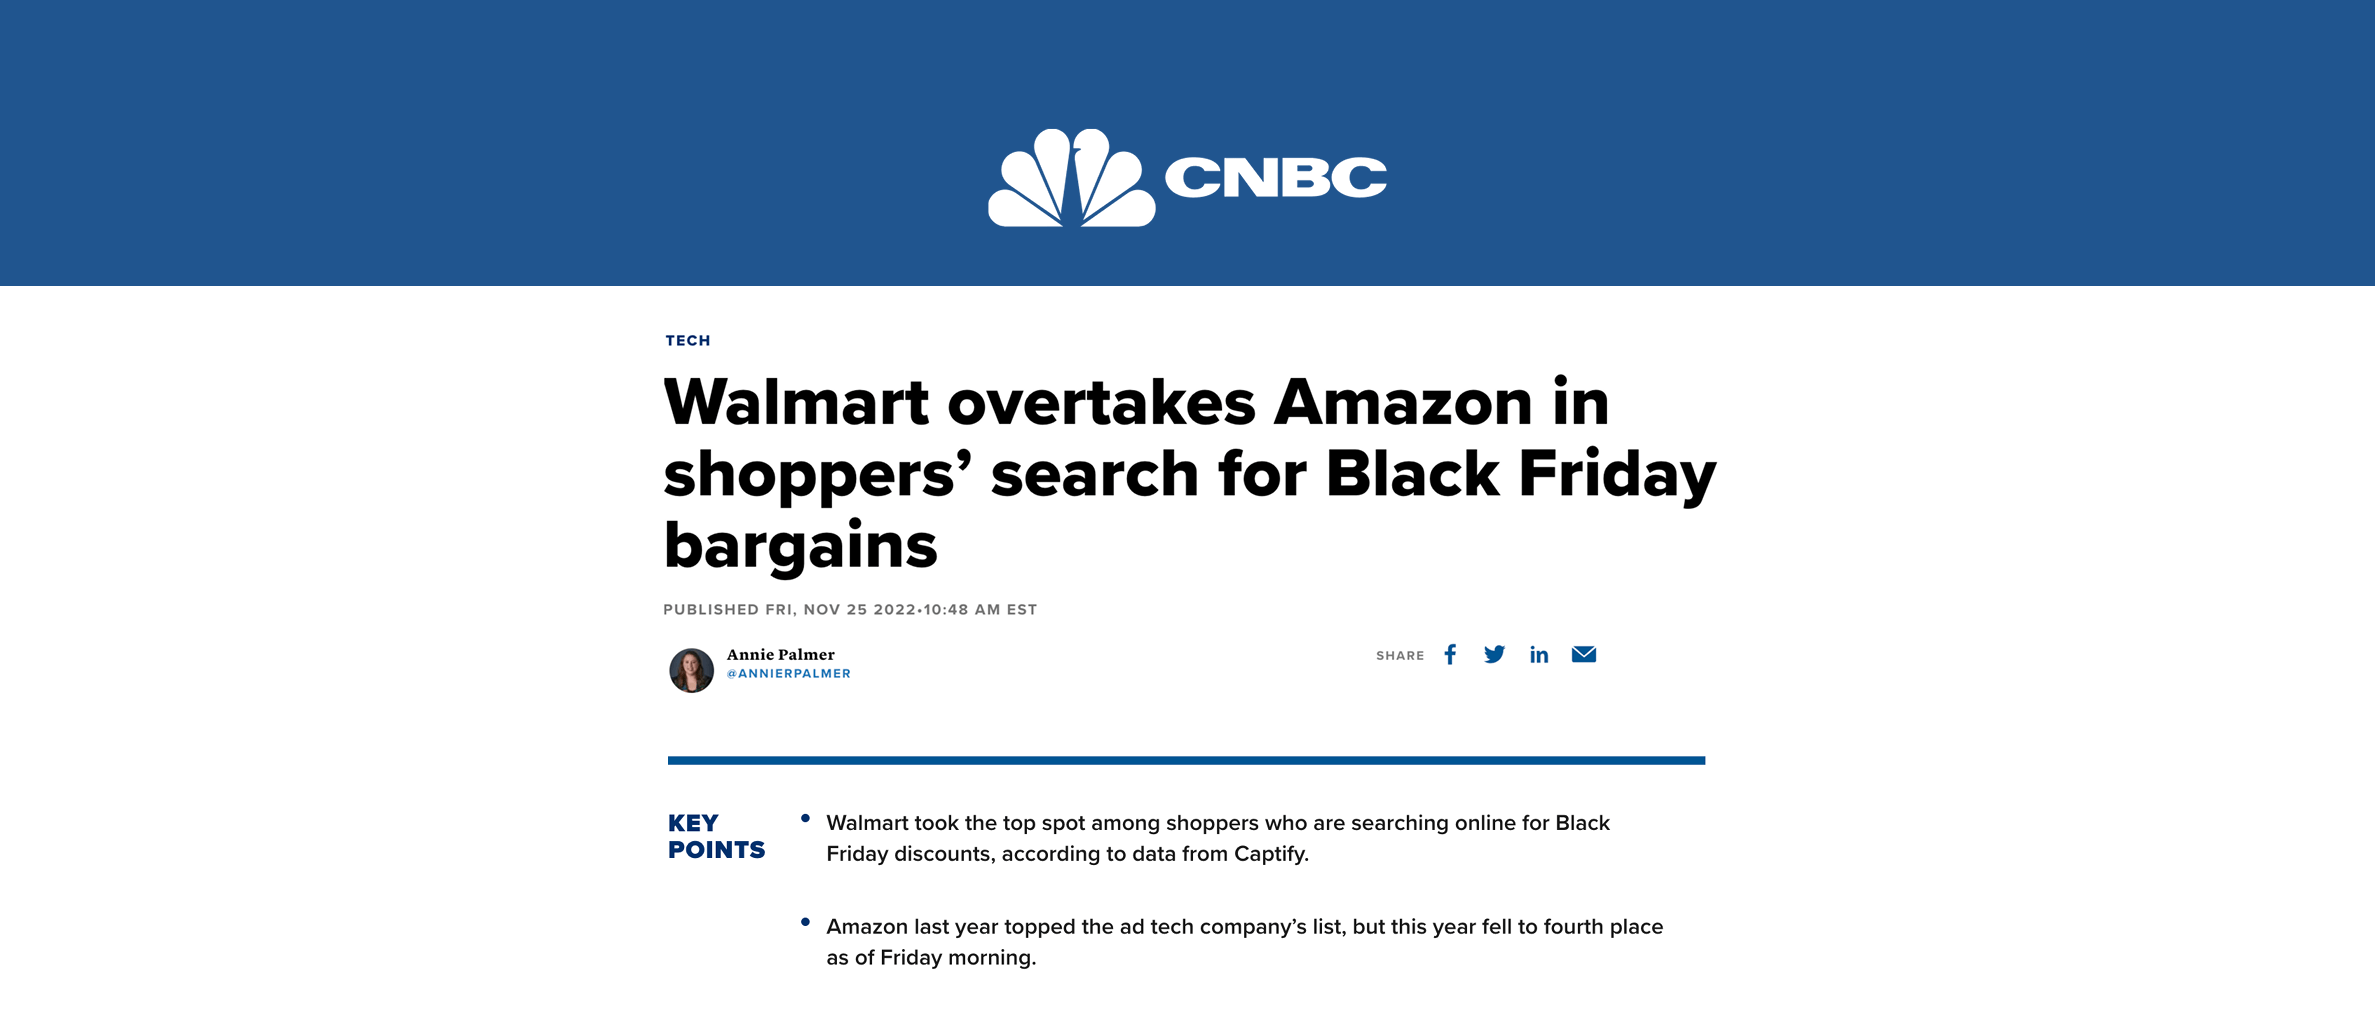 CNBC: Walmart overtakes Amazon in shoppers’ search for Black Friday bargains Captify reveals